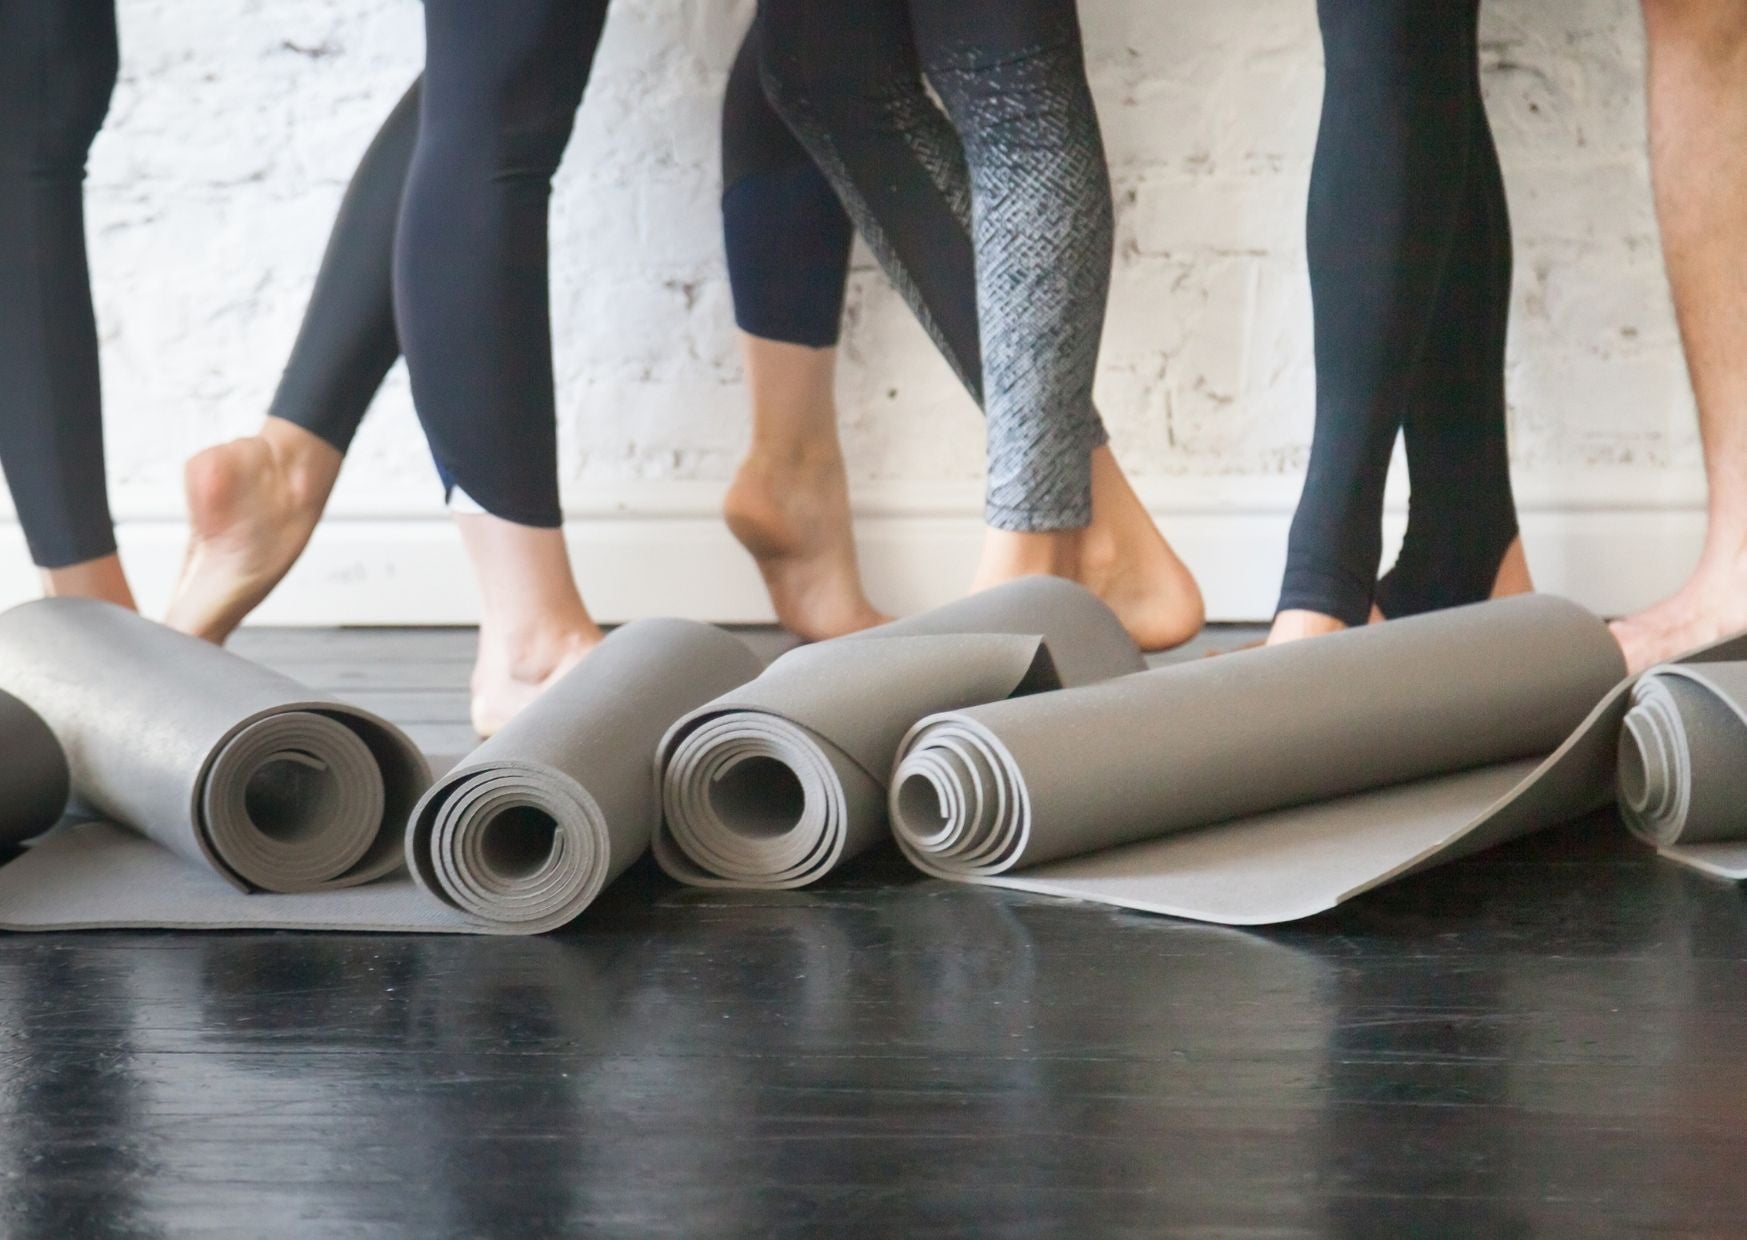 Find your Chi with the Best Yoga Mats and Flooring – Sprung Gym Flooring